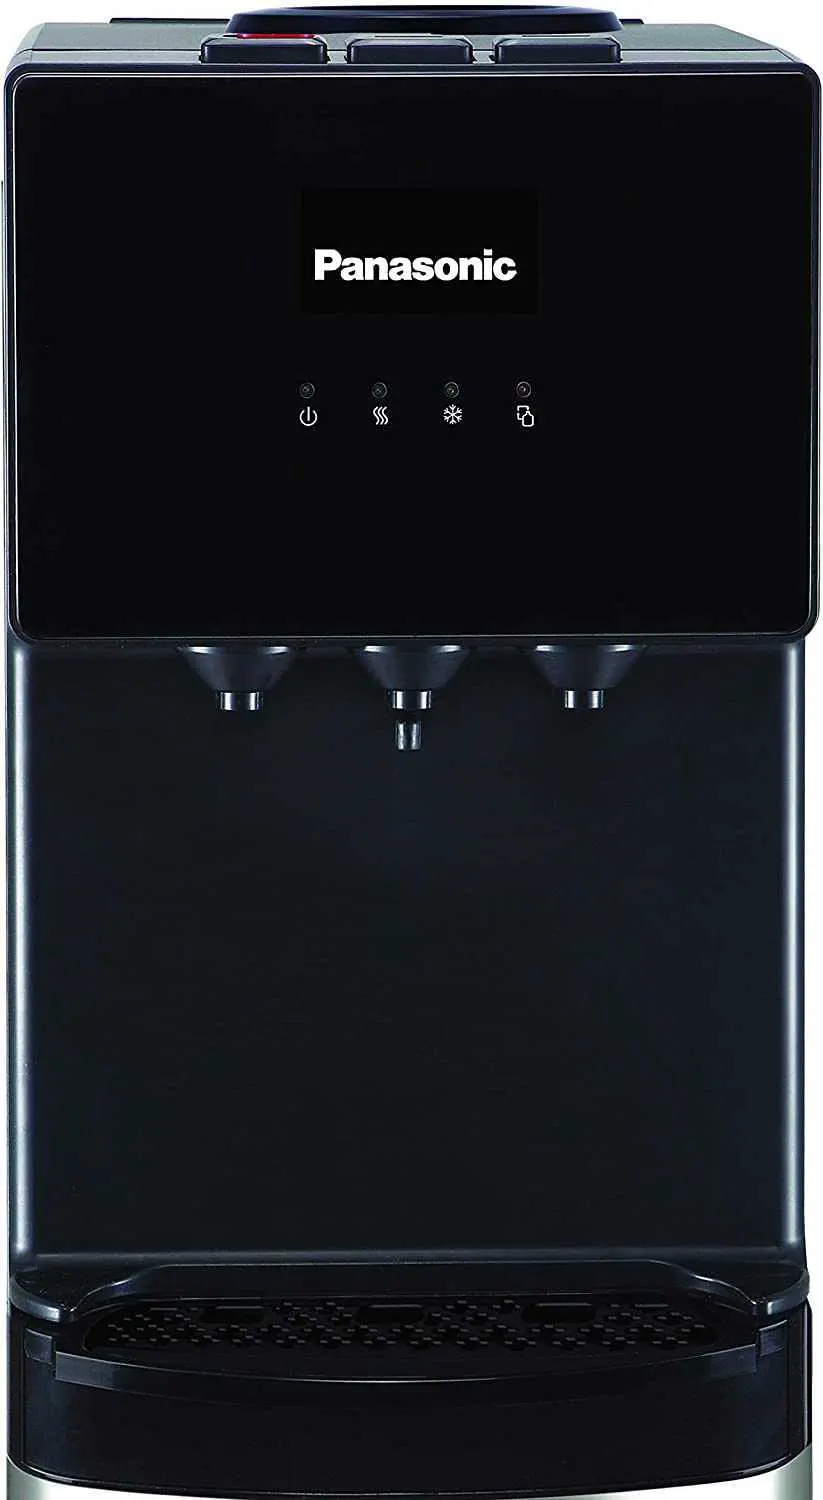 Panasonic Water Dispenser, 3 Taps (Cold + Hot + Normal), Top Loading, Cabinet, Black x Silver, SDMWD3238TG